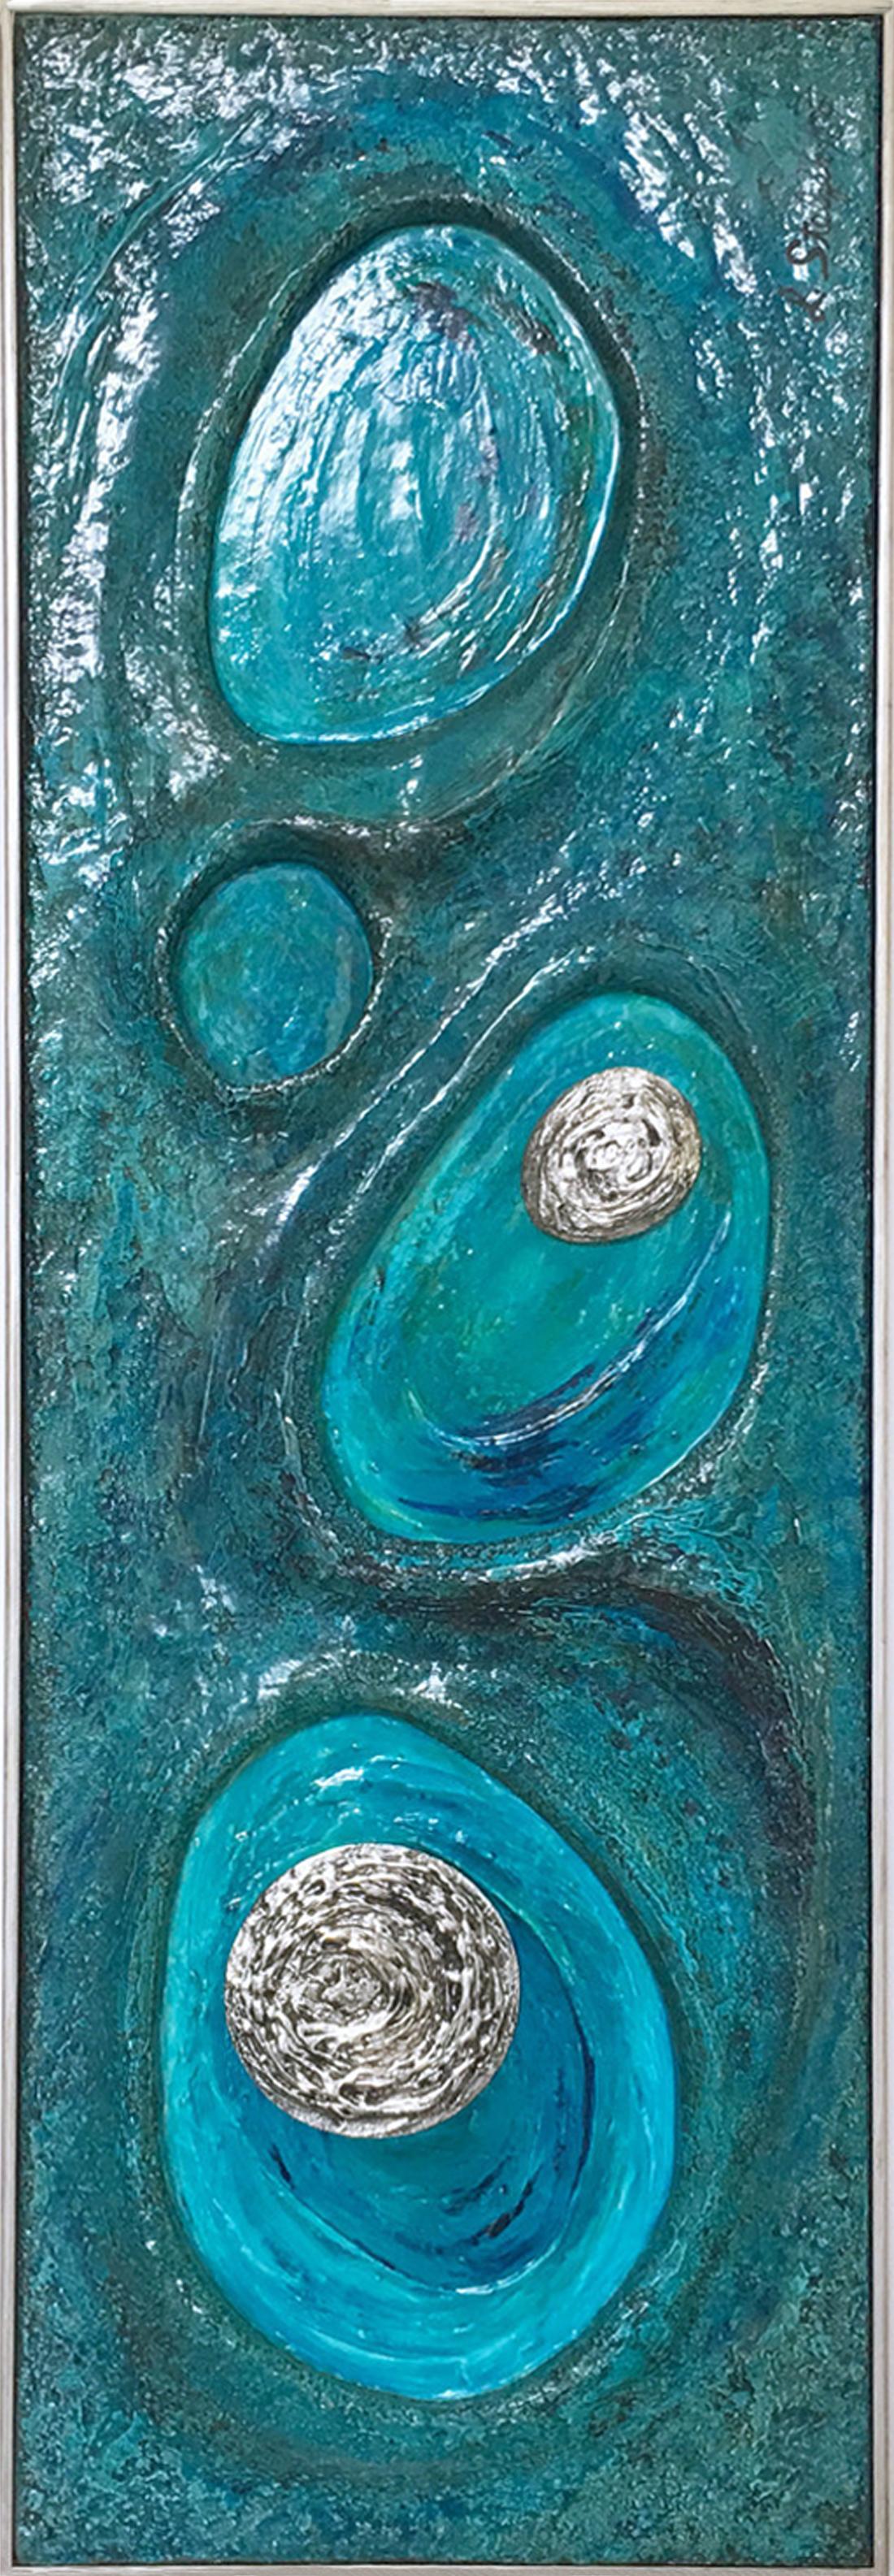 Mesmerizing psychedelic art composition by Californian artist Lorraine Stelzer, dated 1969. Dimensional wall sculpture panel in acrylic or resin. Beautiful bright turquoise color range with silver accents. Elongated shape, the panel can be hanged in